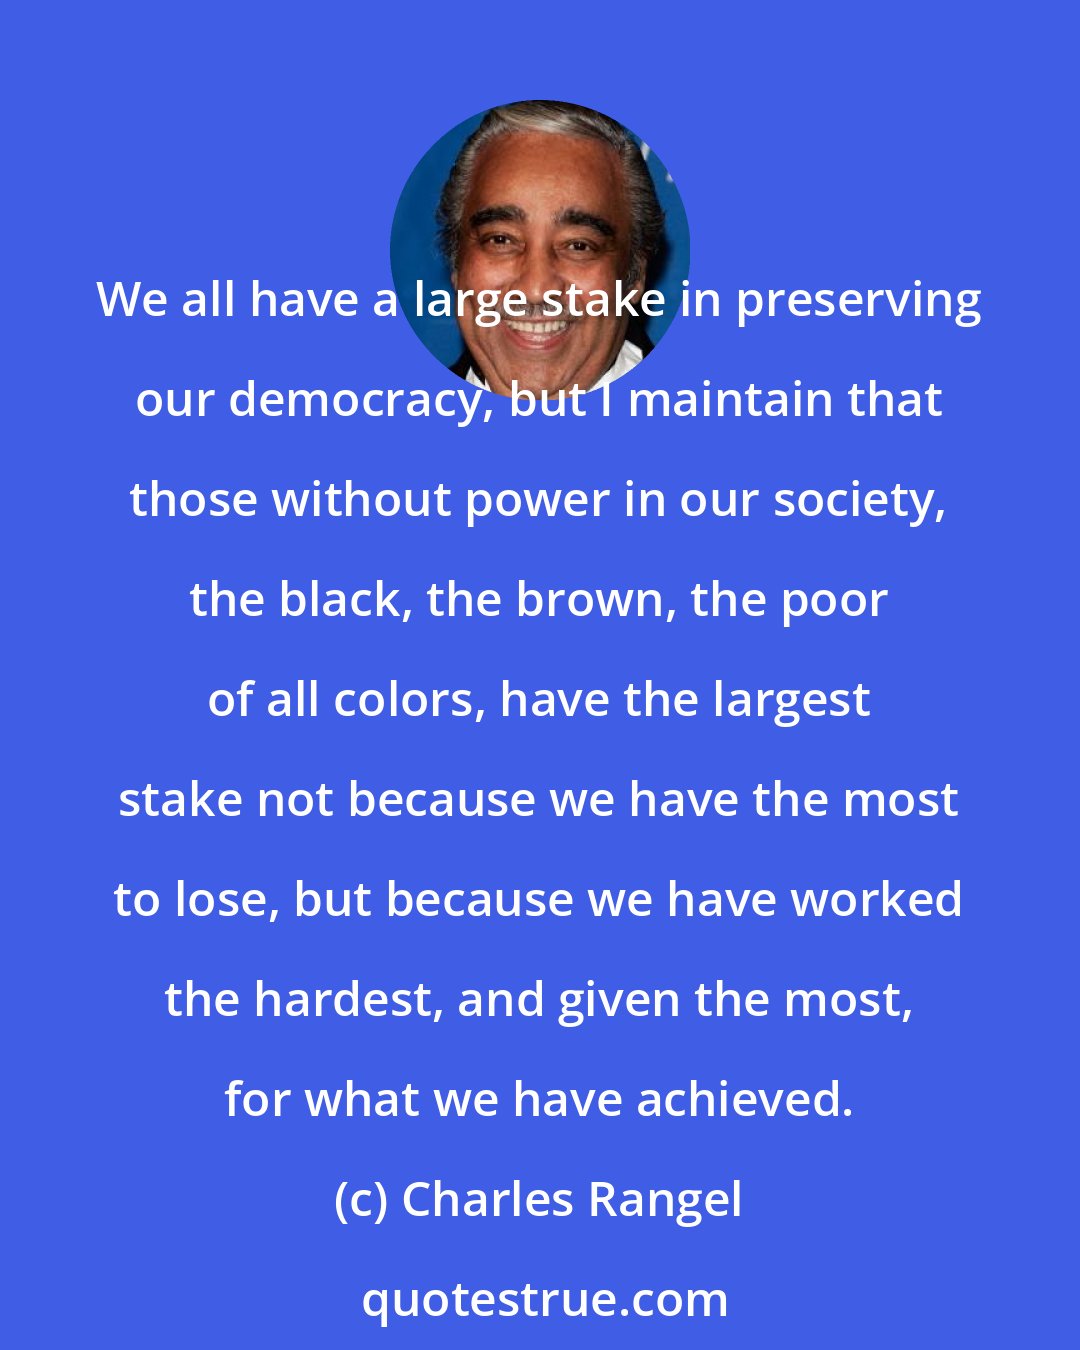 Charles Rangel: We all have a large stake in preserving our democracy, but I maintain that those without power in our society, the black, the brown, the poor of all colors, have the largest stake not because we have the most to lose, but because we have worked the hardest, and given the most, for what we have achieved.